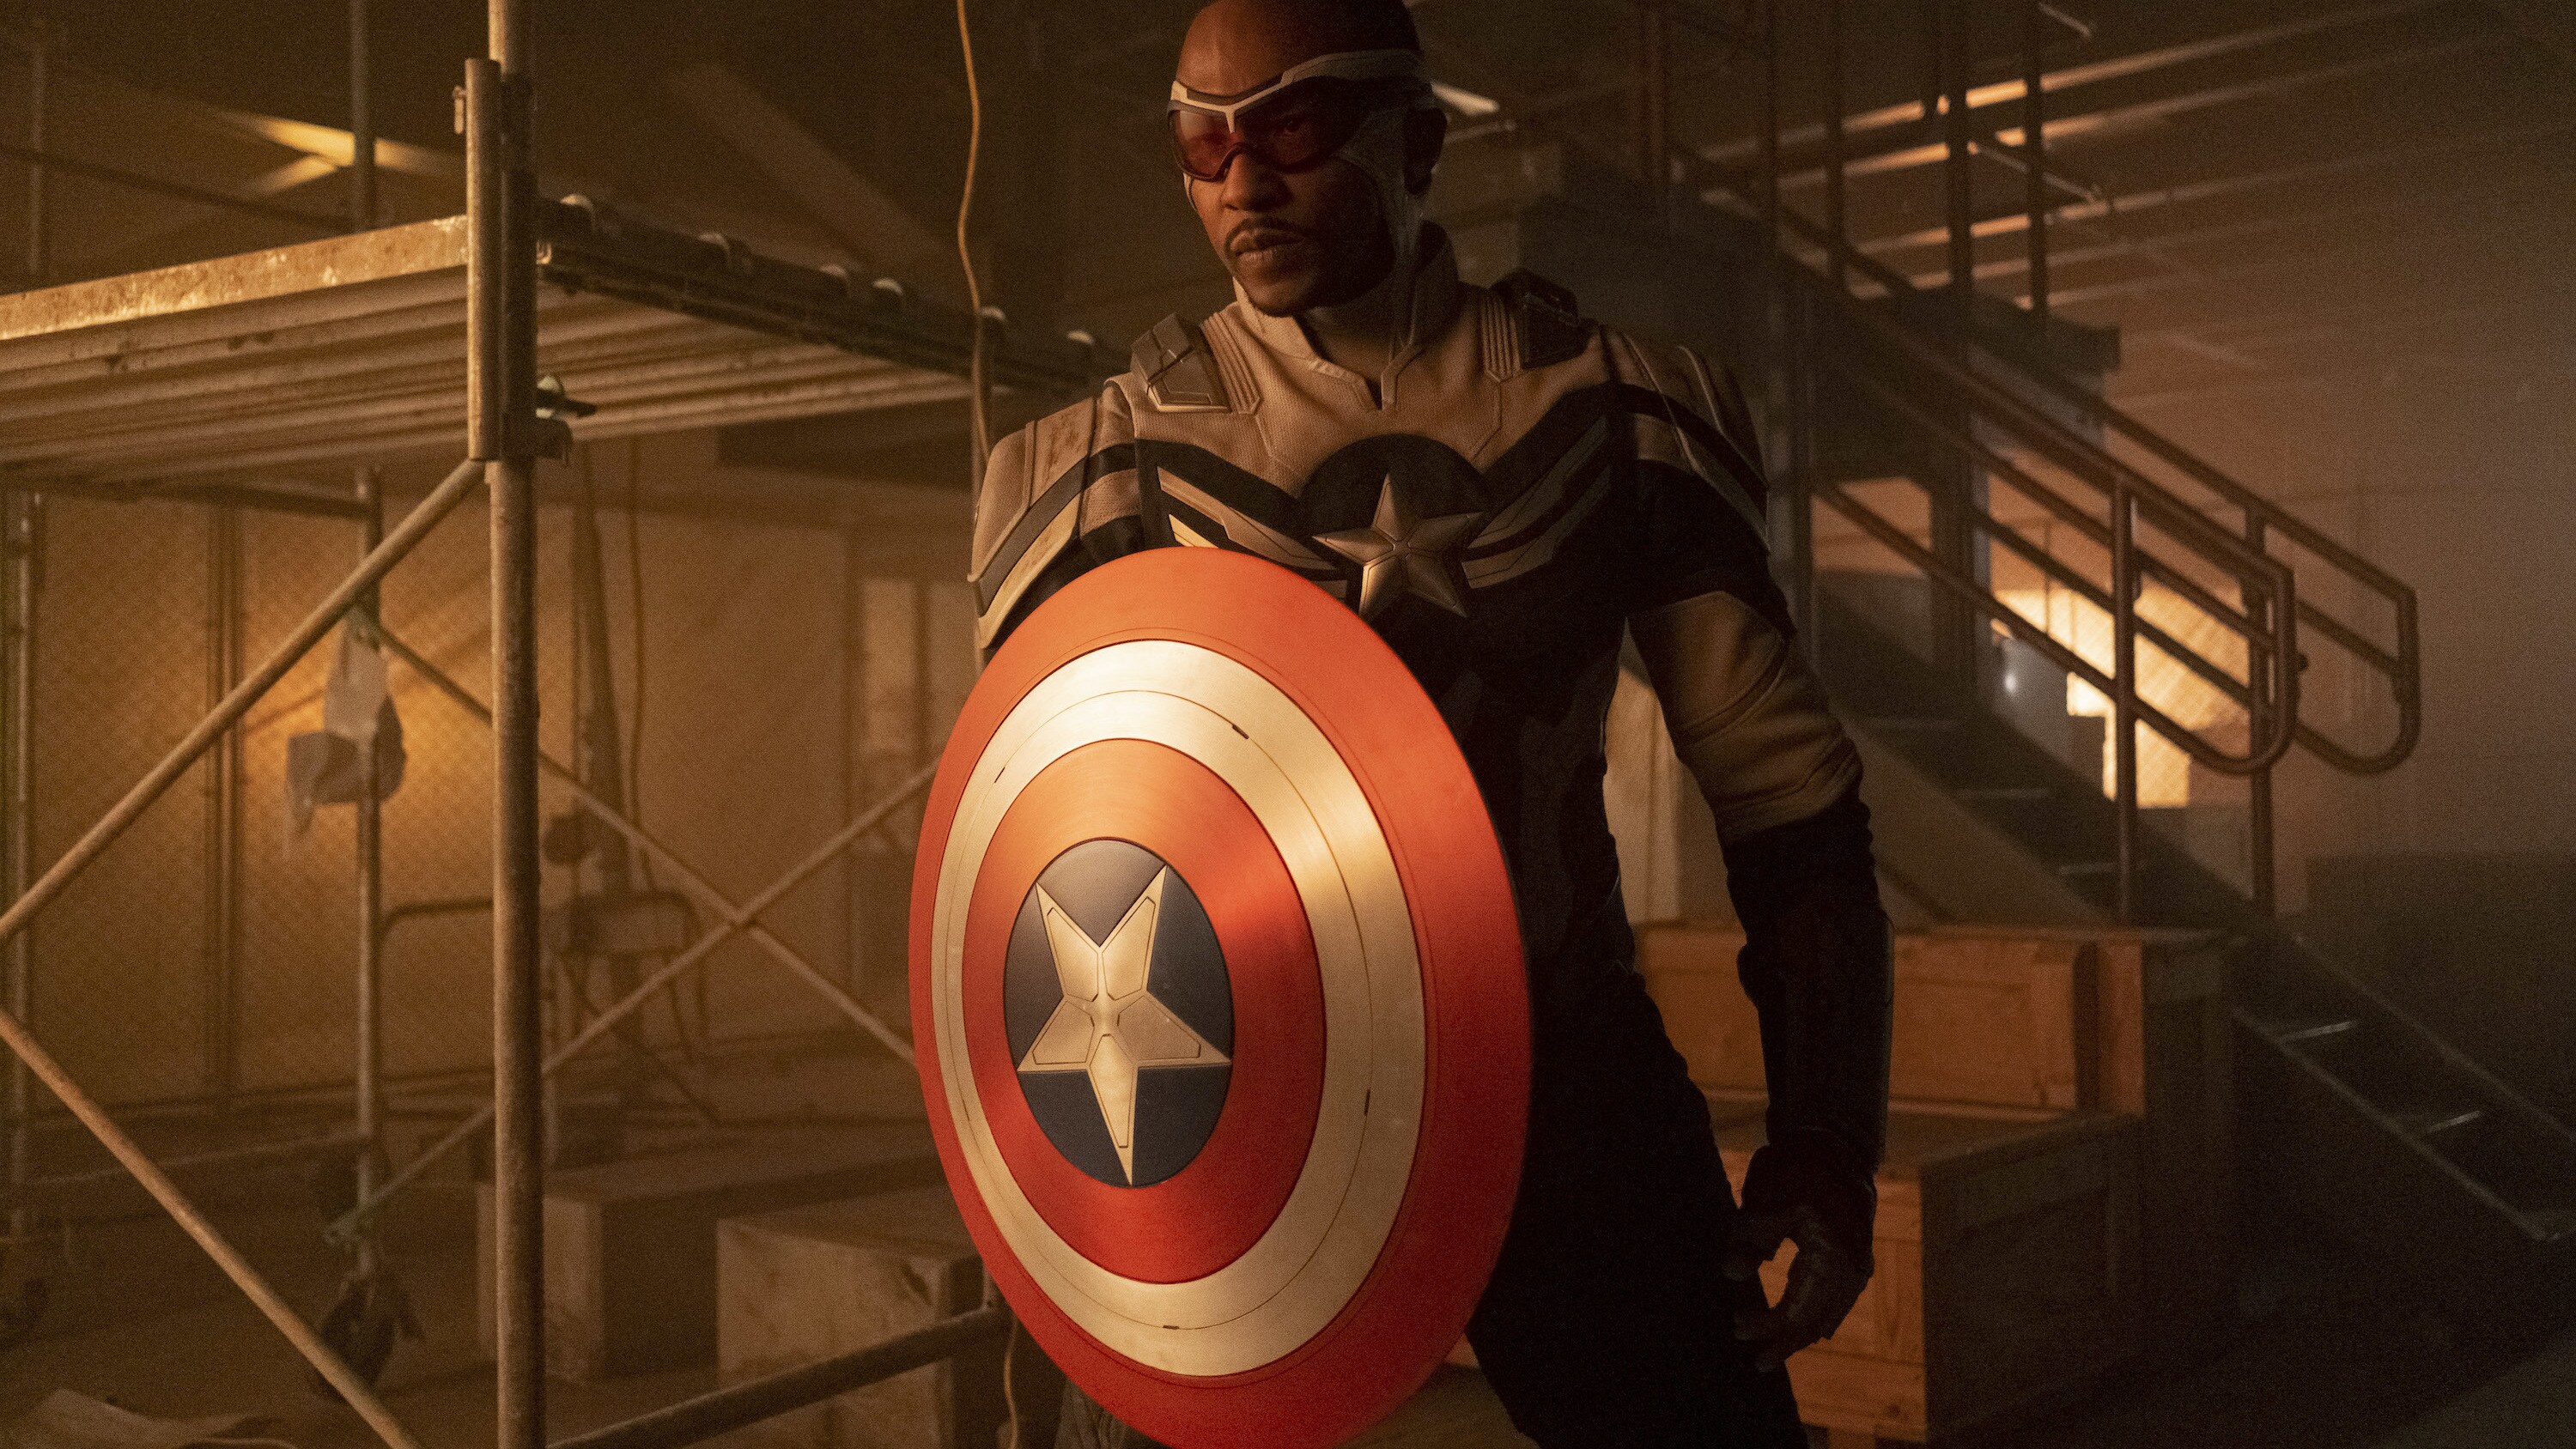 Falcon/Sam Wilson (Anthony Mackie) in Marvel Studios' THE FALCON AND THE WINTER SOLDIER exclusively on Disney+. Photo by Chuck Zlotnick. ©Marvel Studios 2021. All Rights Reserved. 